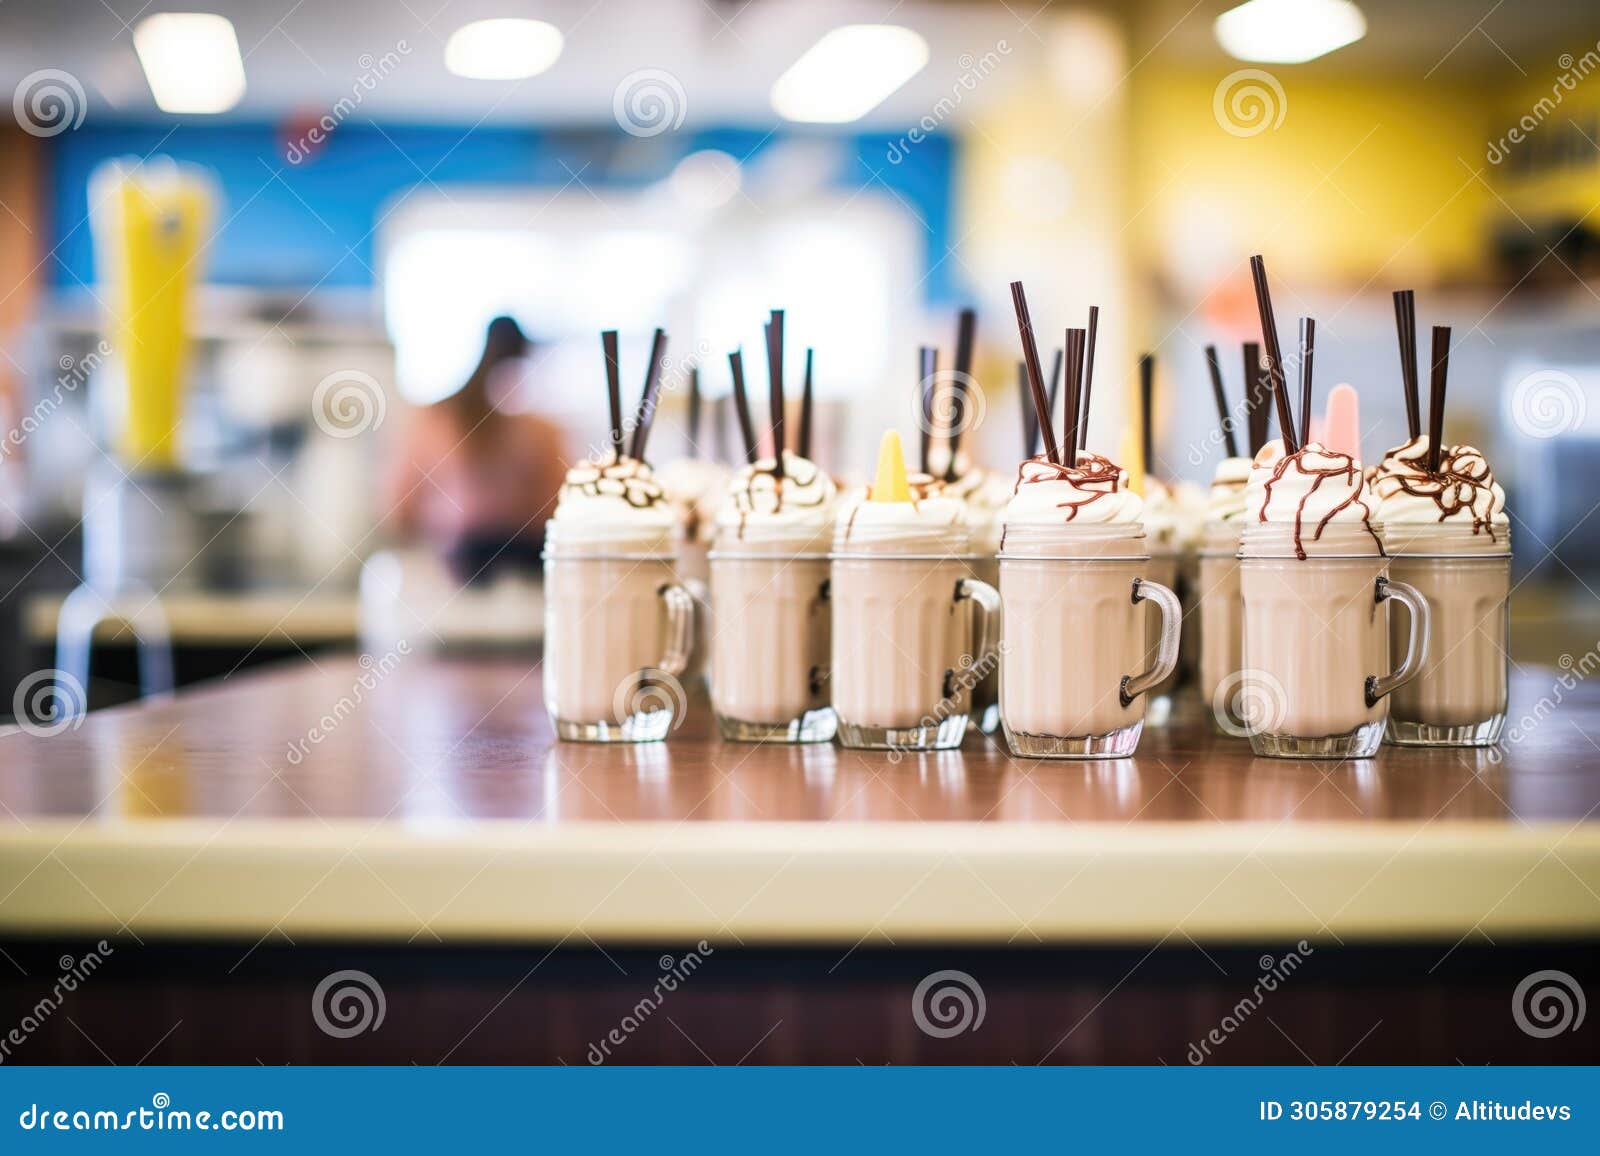 rows of coffee shakes ready for service in a caf